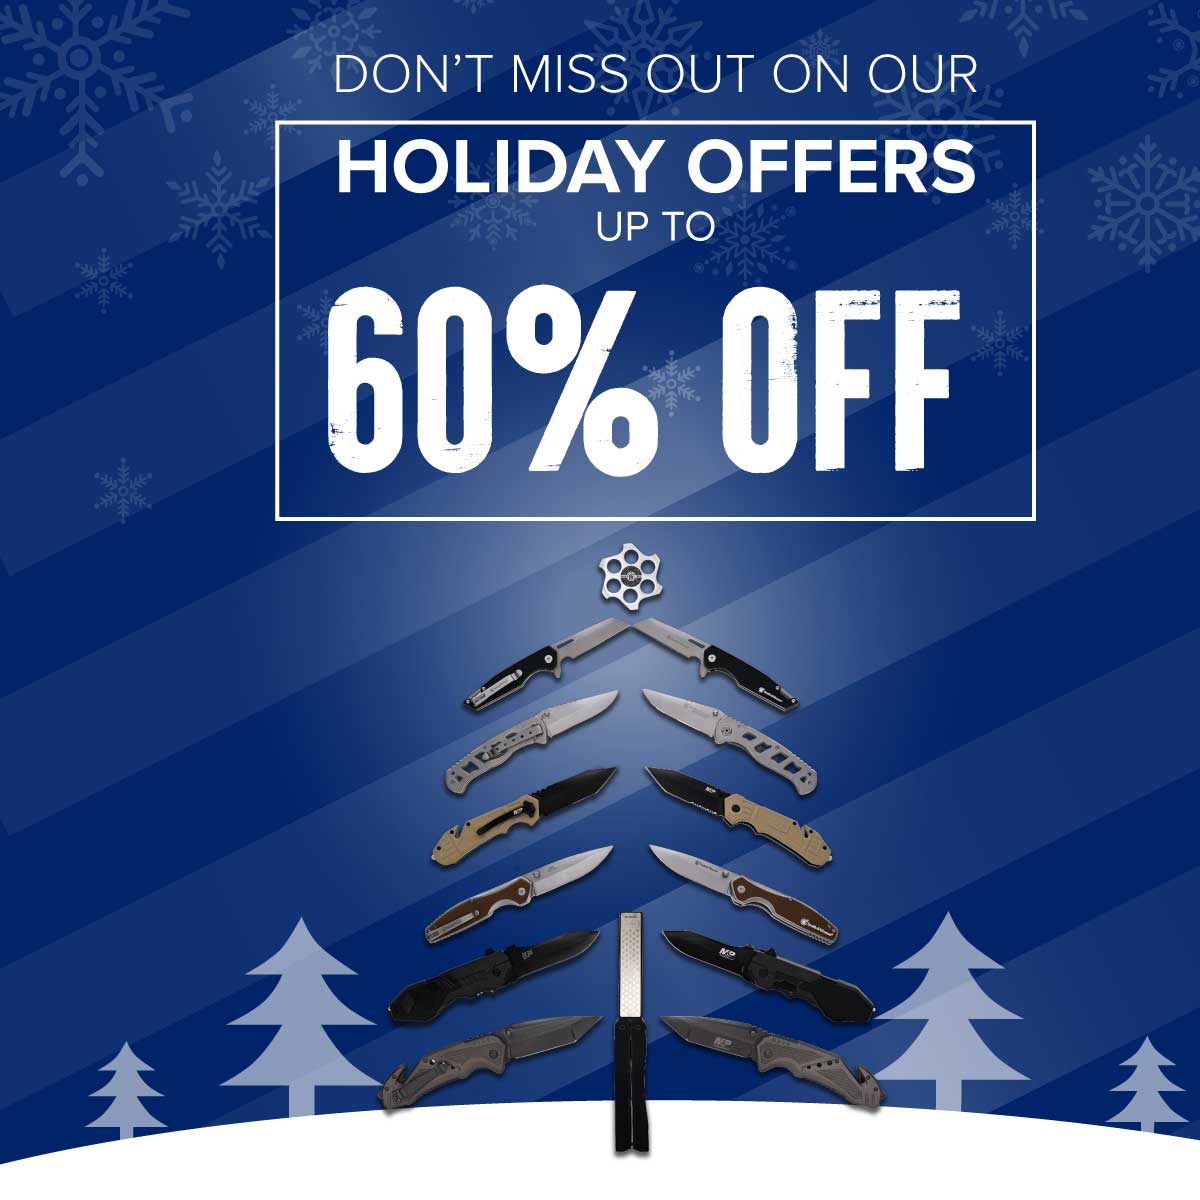 holiday savings alert! save up to 60% off select products, shop now